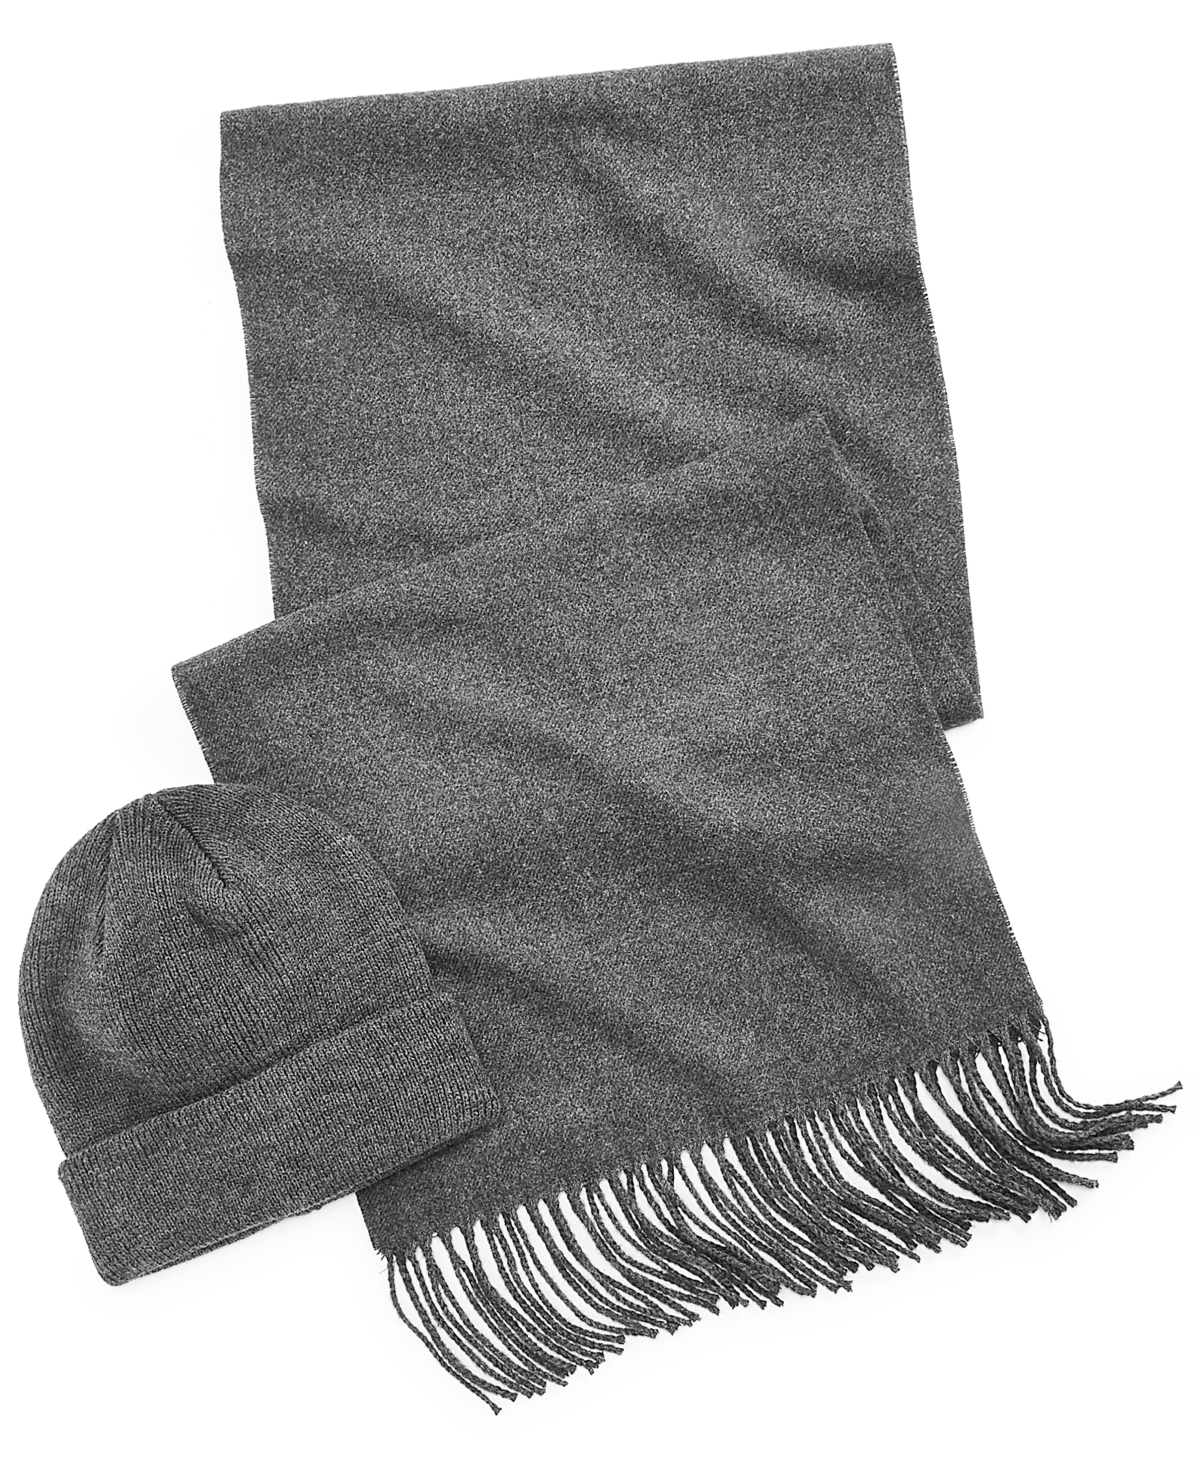 Men's Beanie & Scarf Set, Created for Macy's - Charcoal Heather